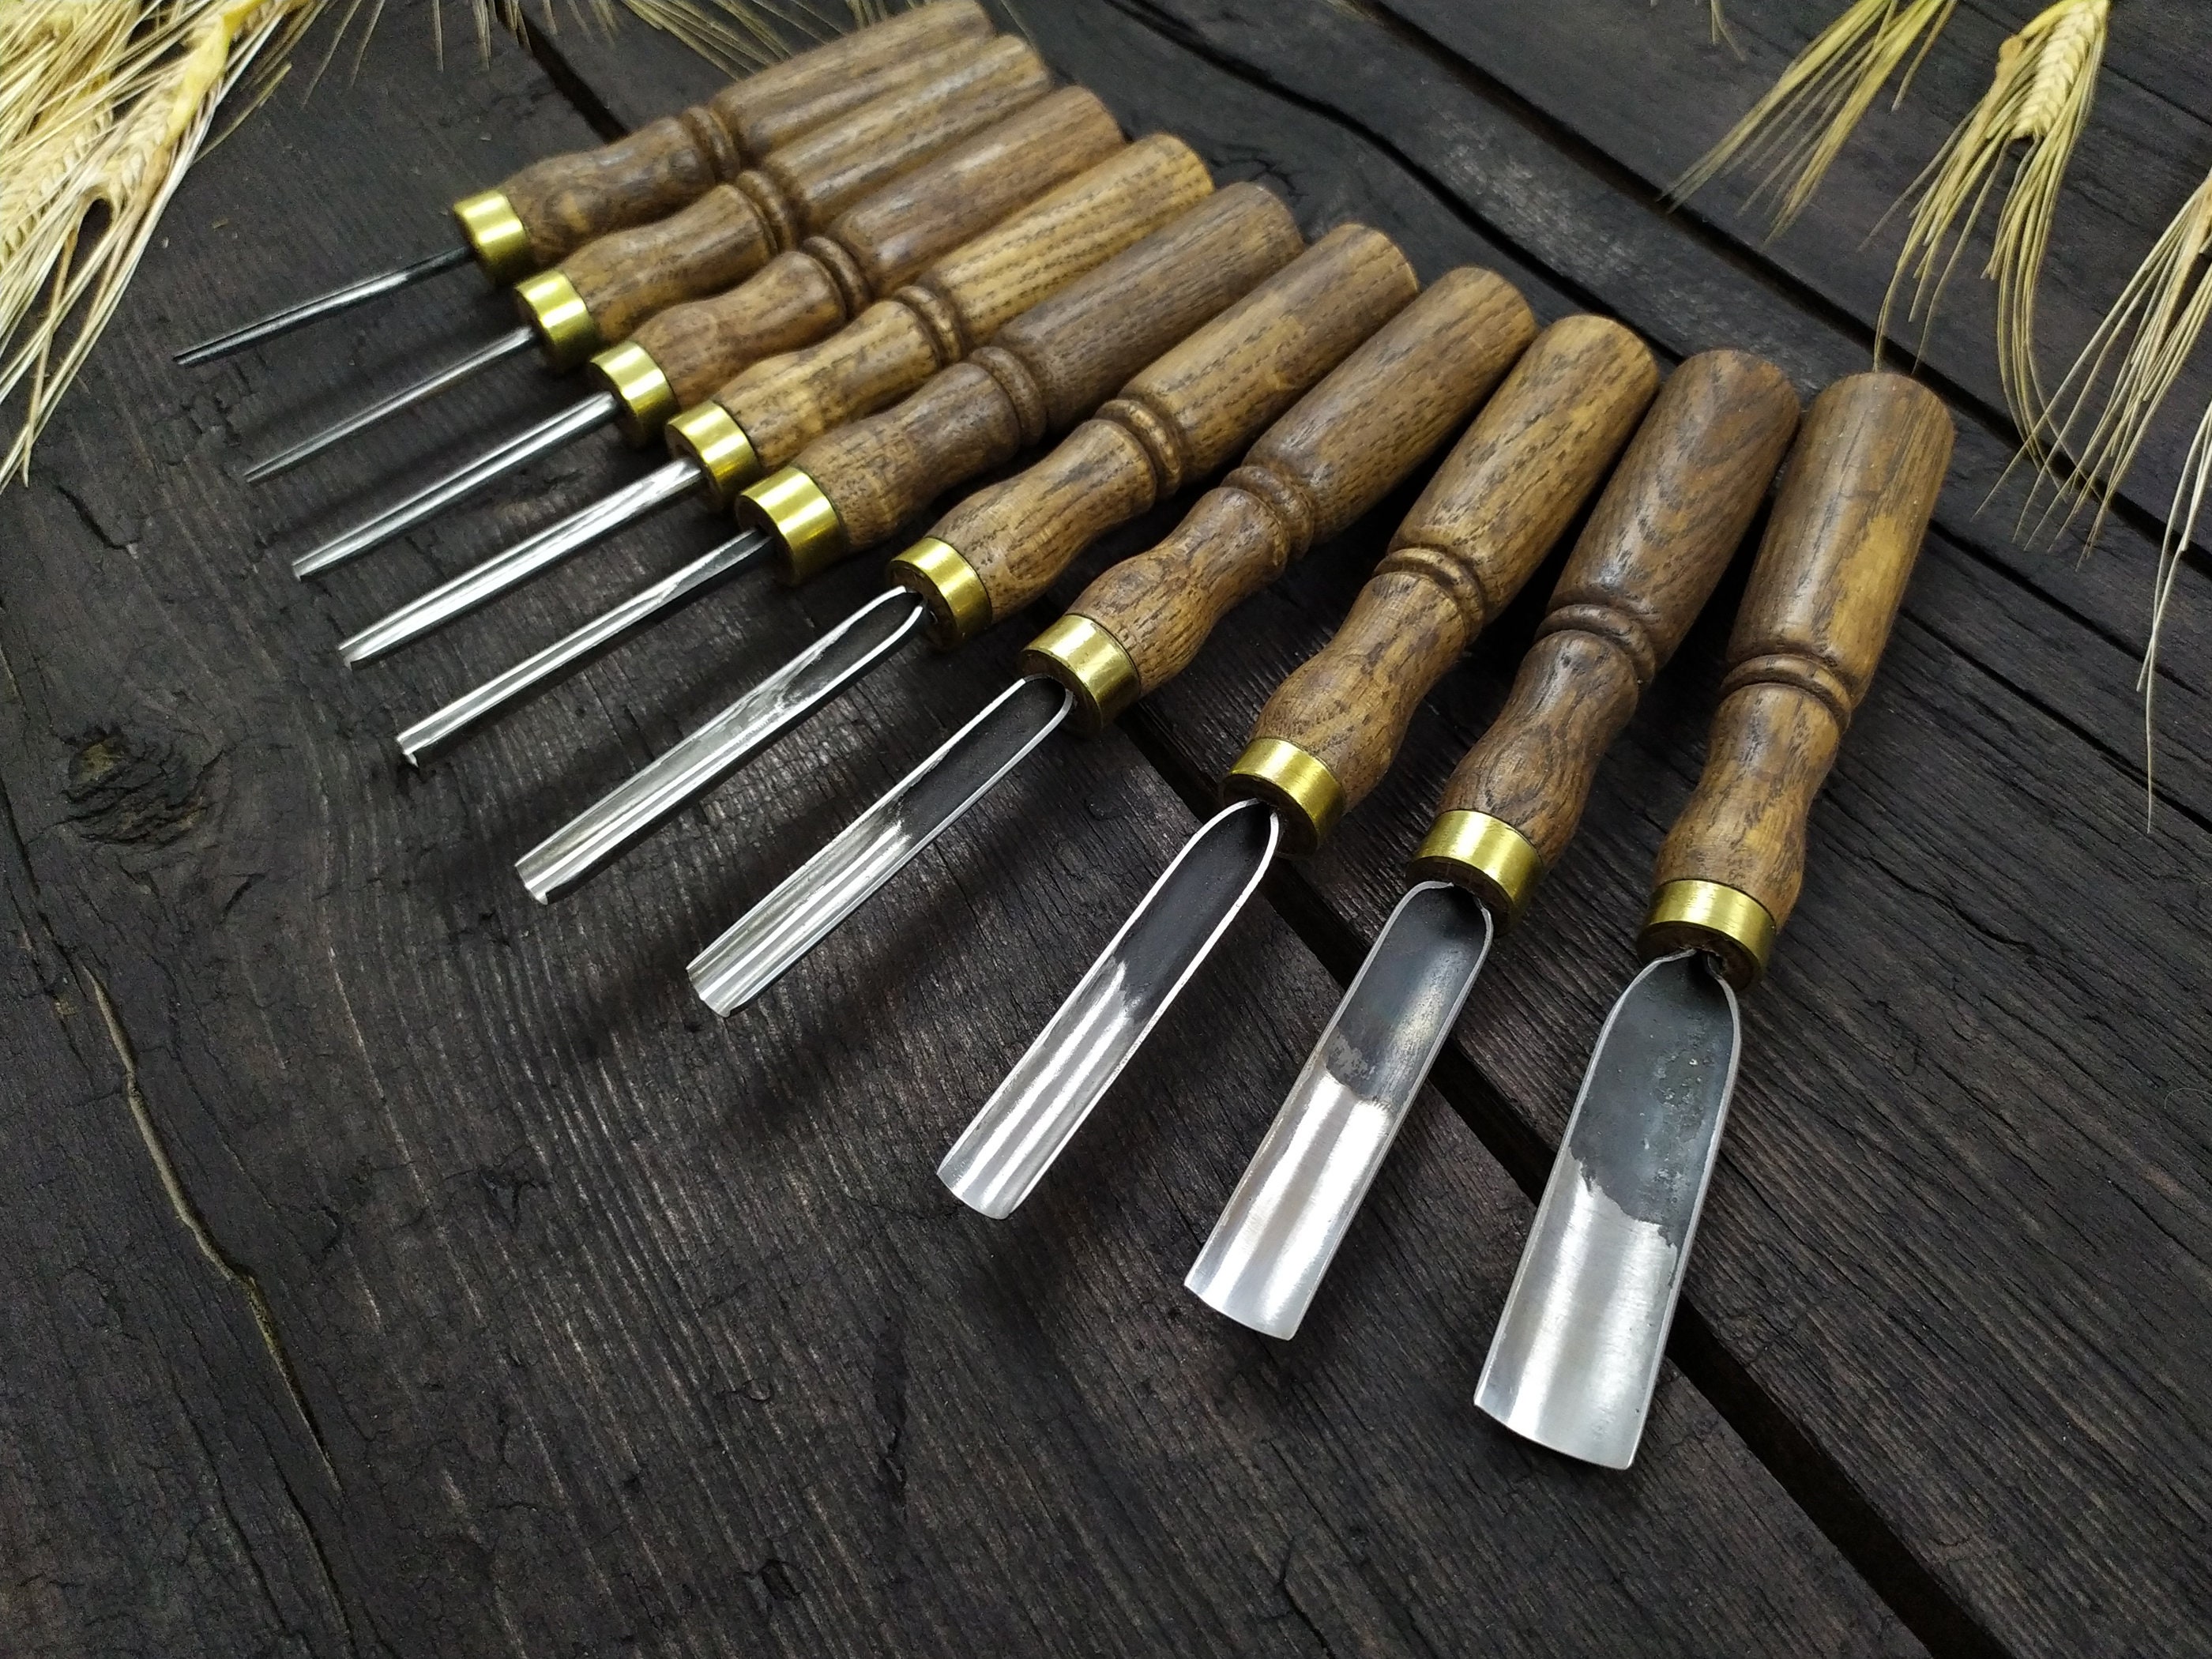 Forged gauges for wood carving, wood working tools for sale